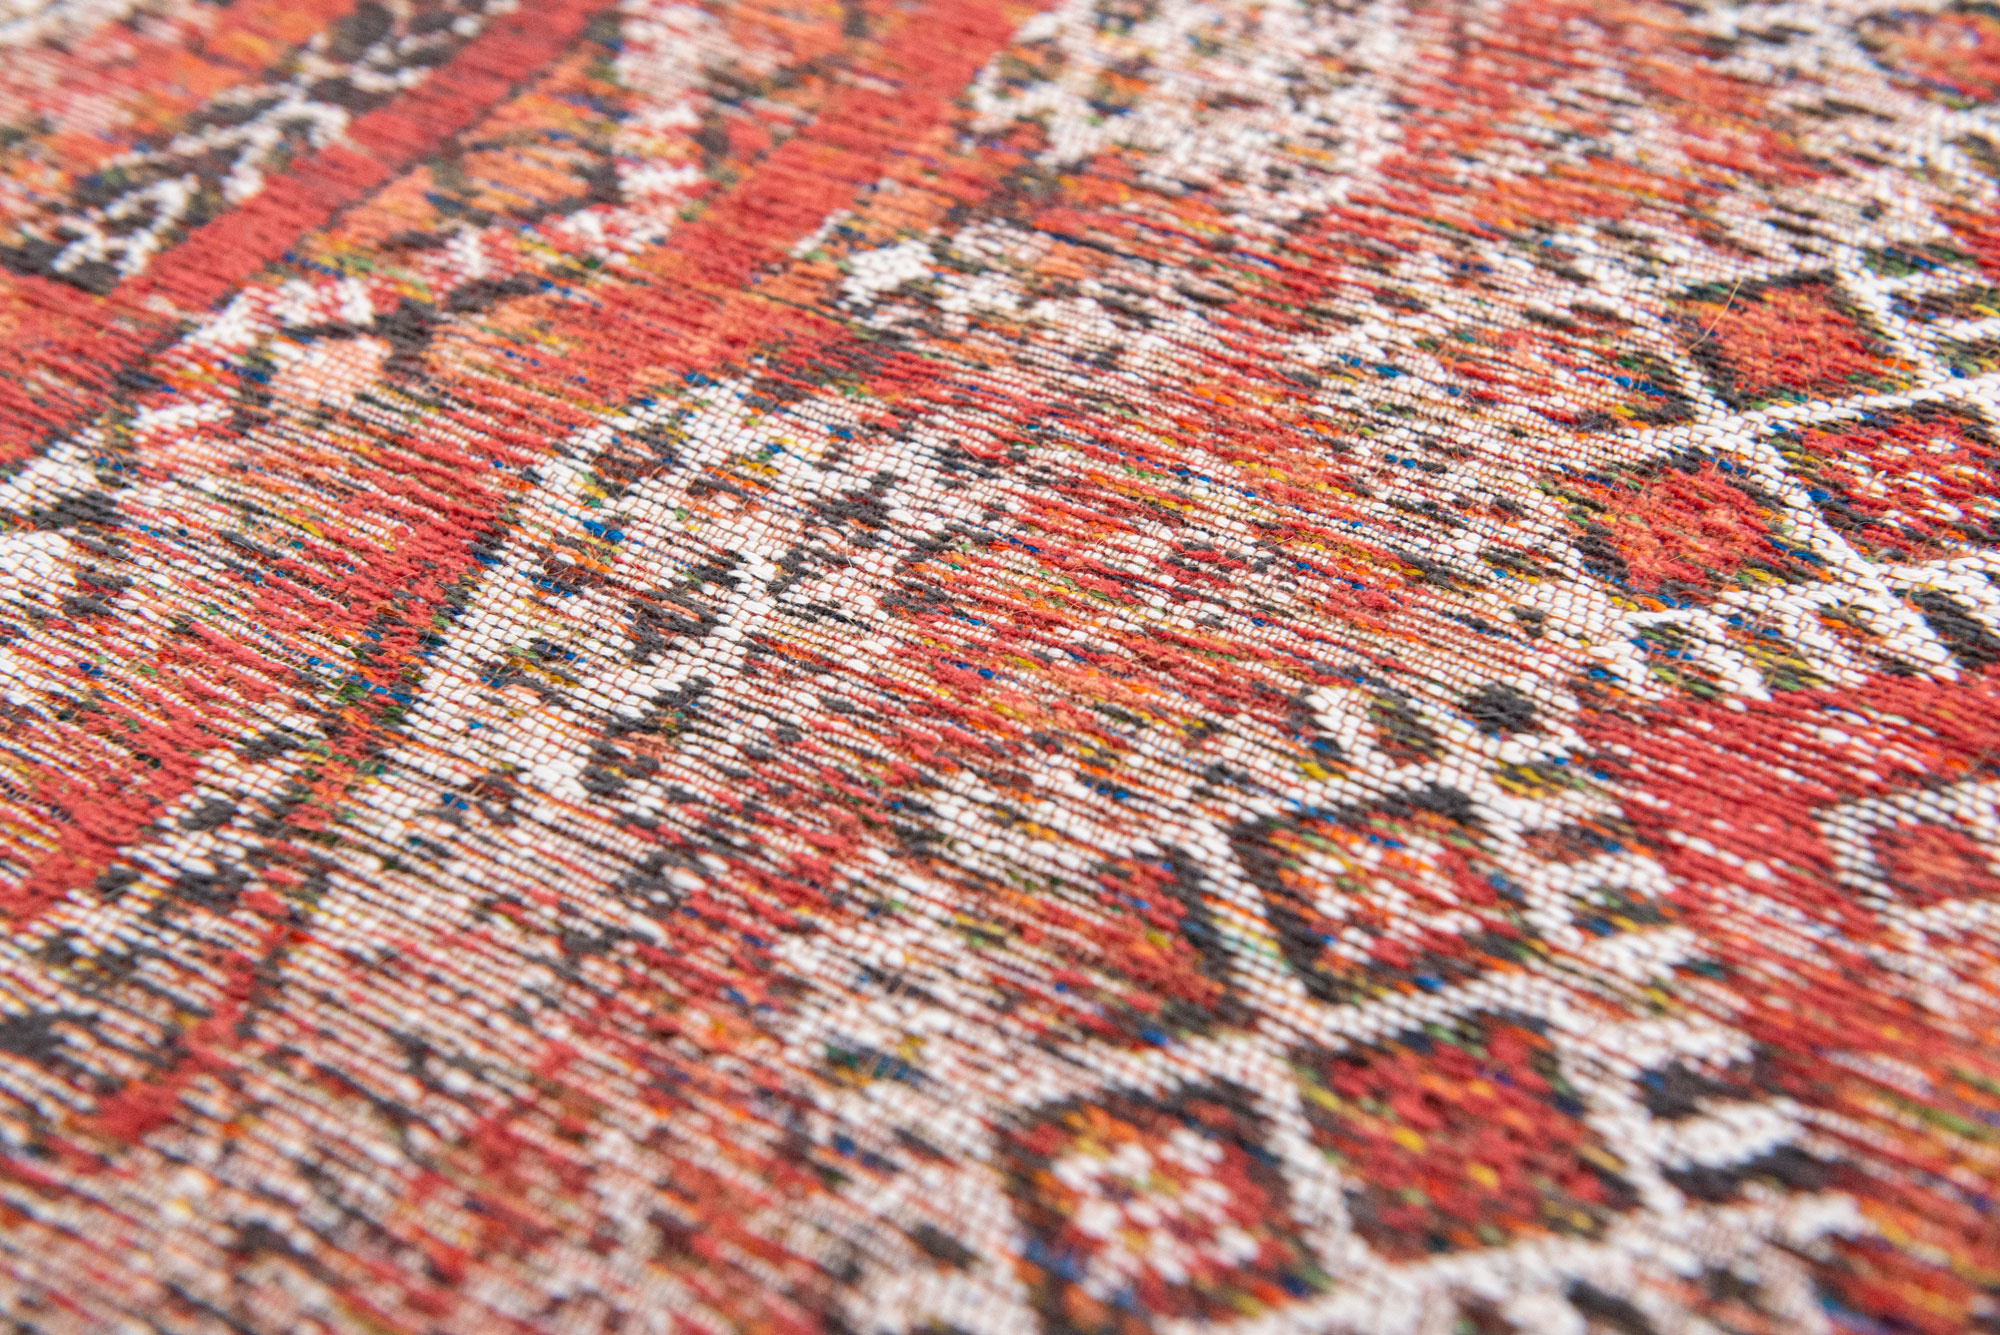 Antiquarian Flatwoven Red Rug ☞ Size: 5' 7" x 8' (170 x 240 cm)